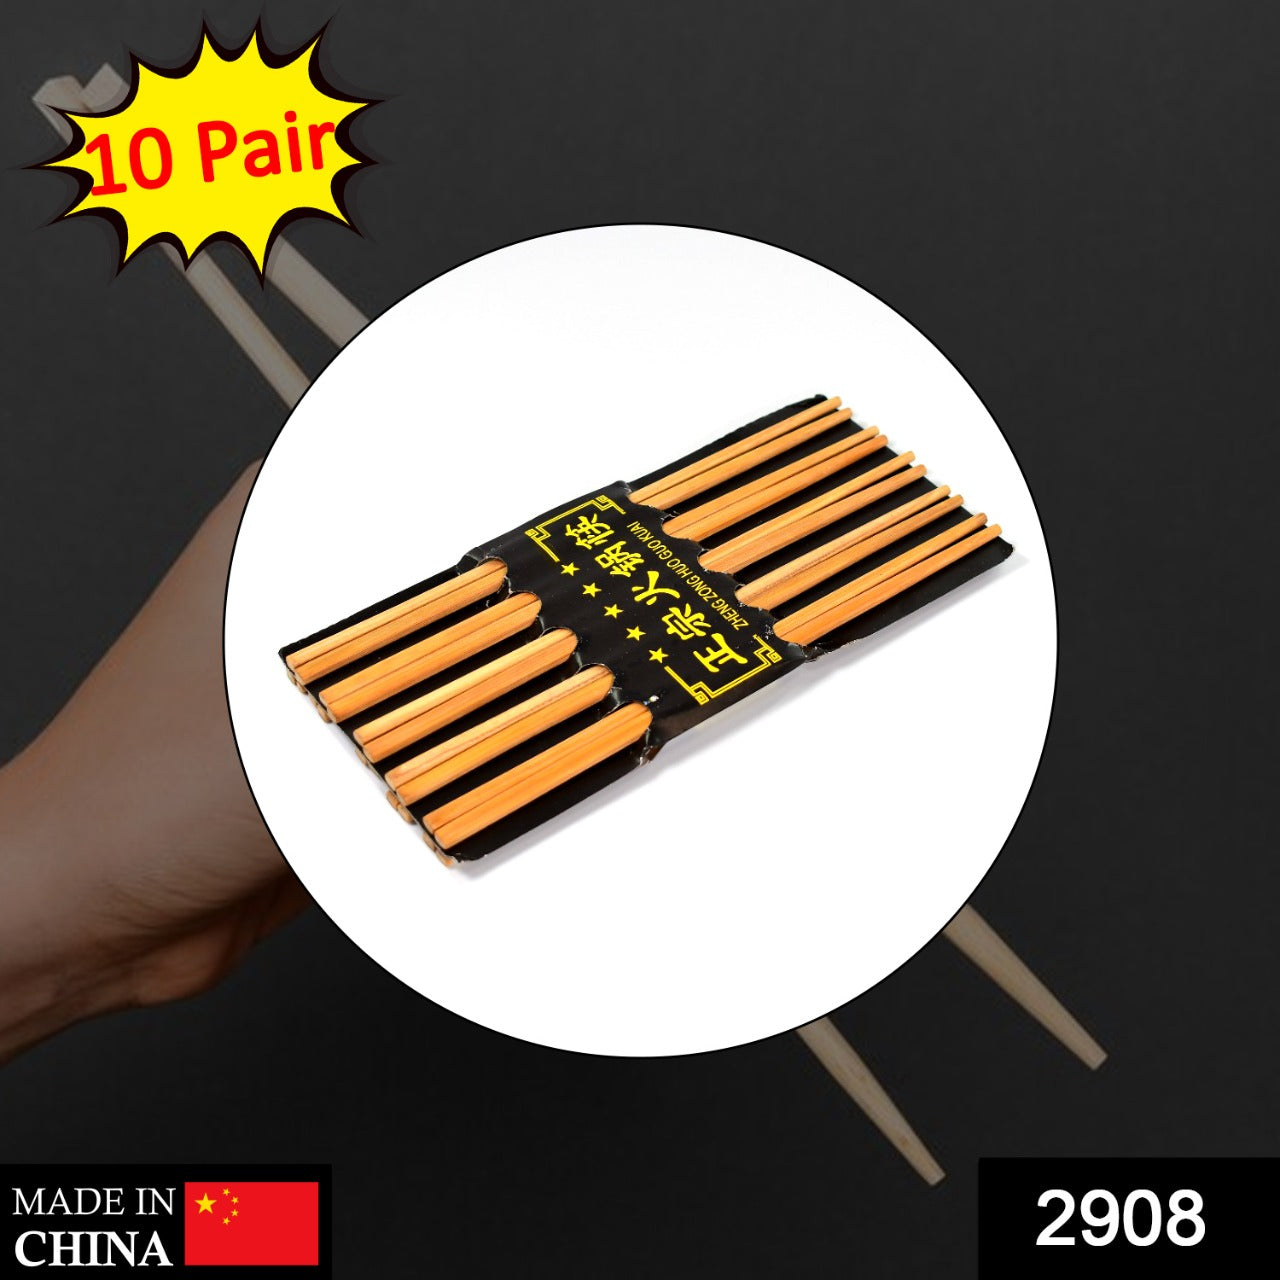 2908 10pair Chopsticks Set Lightweight Easy to Use Chop Sticks with Case for Sushi, Noodles and Other Asian Food 